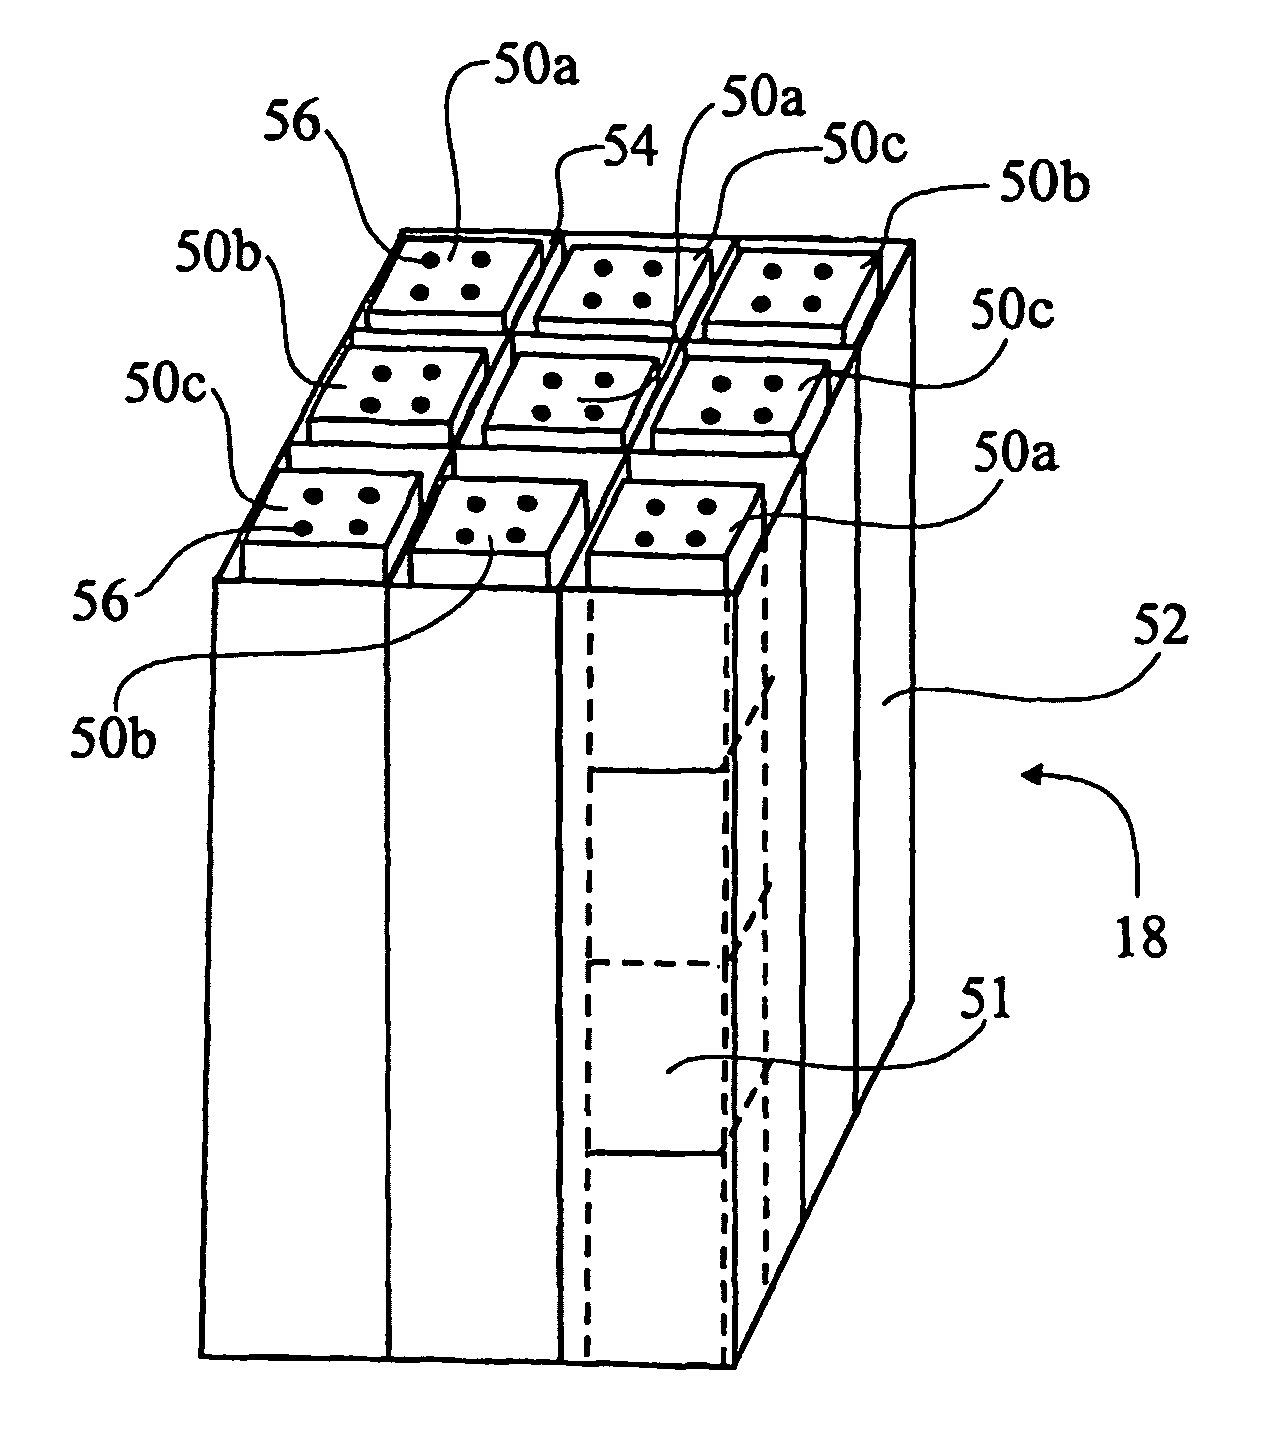 Process and device in connection with the production of oxygen or oxygen enriched air